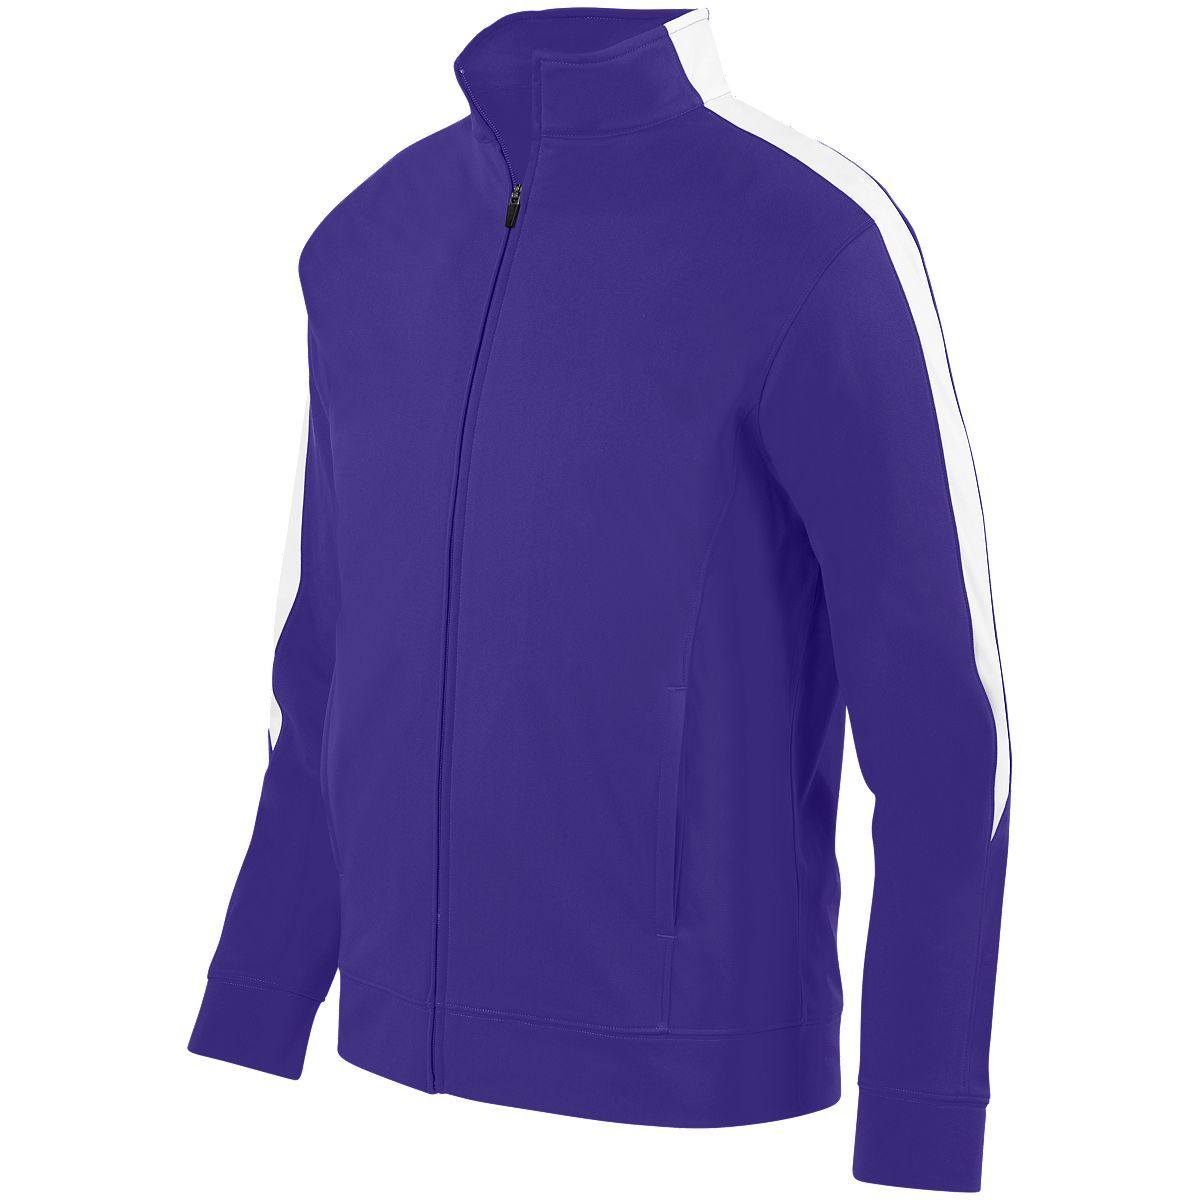 Augusta Sportswear Medalist Jacket 2.0 in Purple/White  -Part of the Adult, Adult-Jacket, Augusta-Products, Outerwear product lines at KanaleyCreations.com